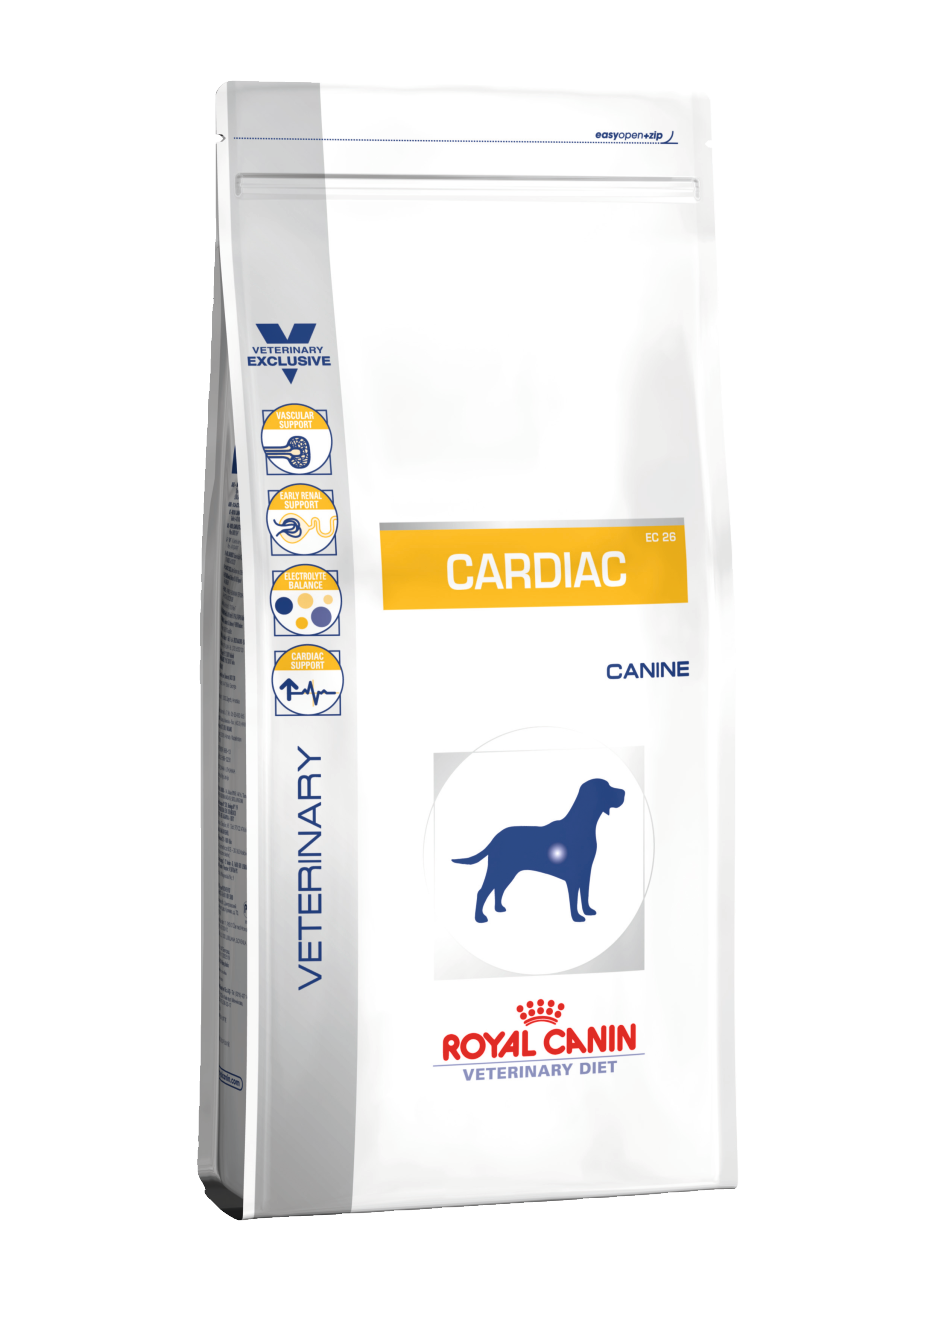 royal canin diet food